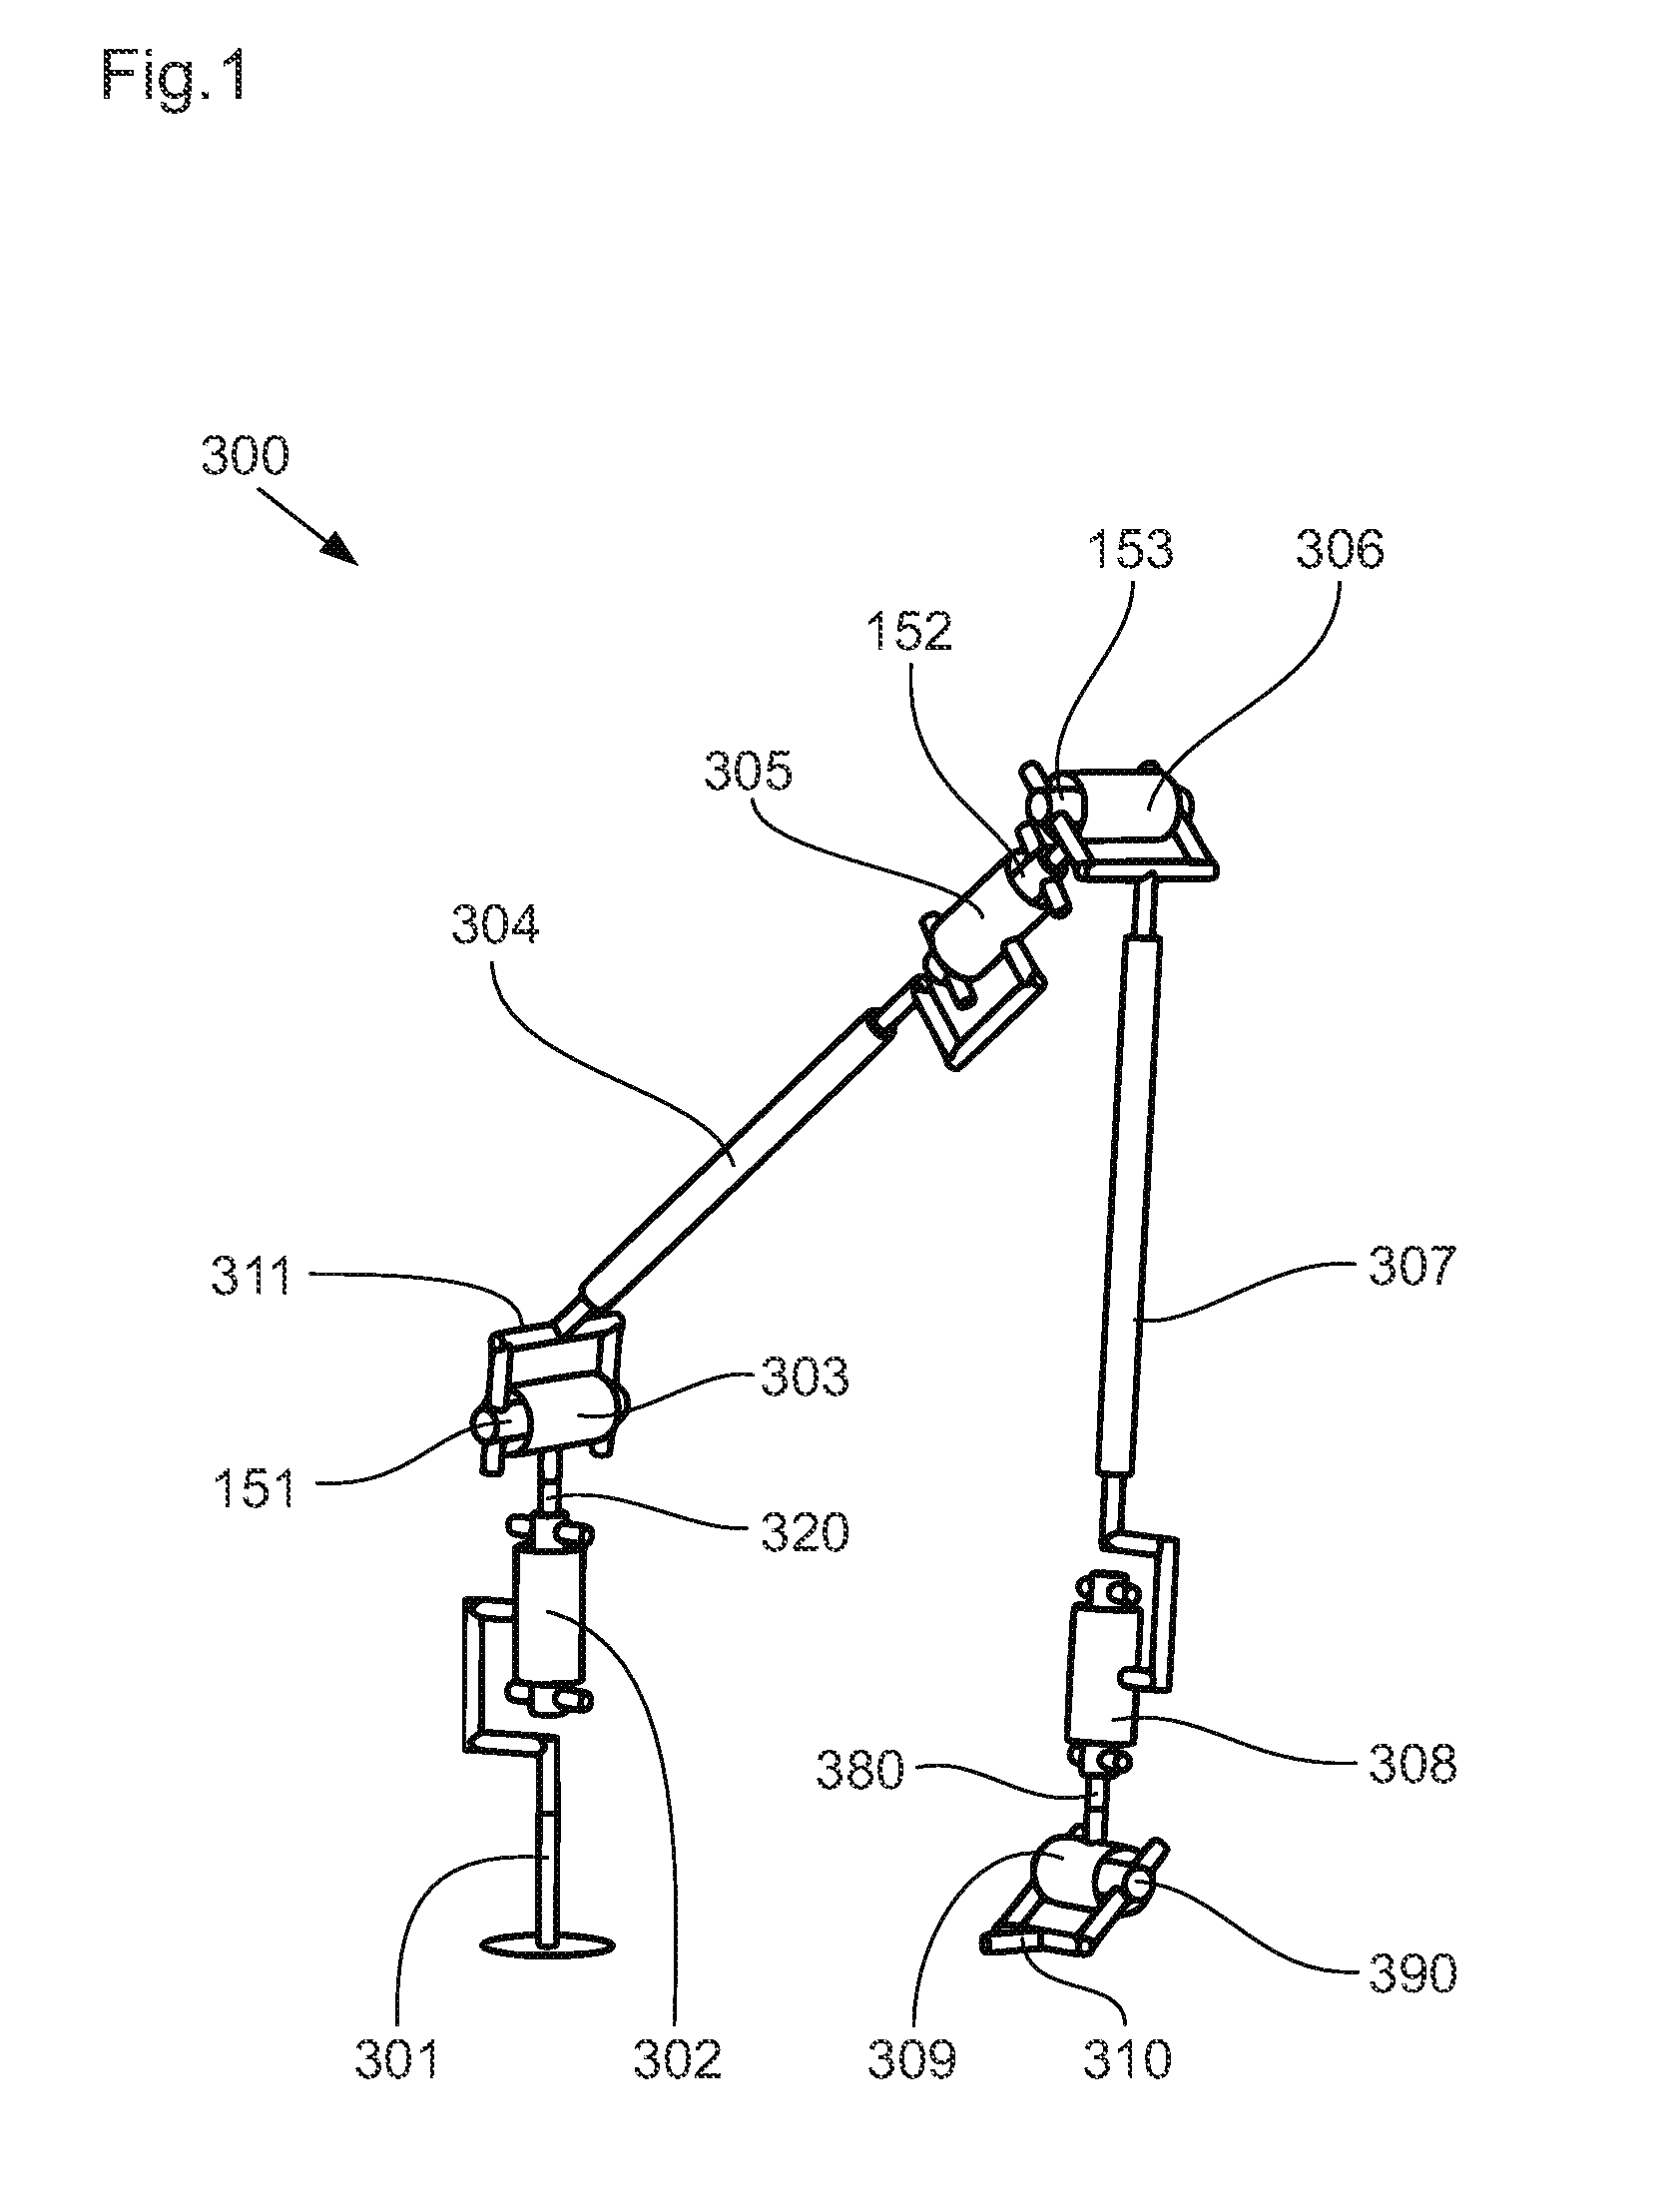 Articulated mechanical arm equipped with a passive device for compensation for gravity